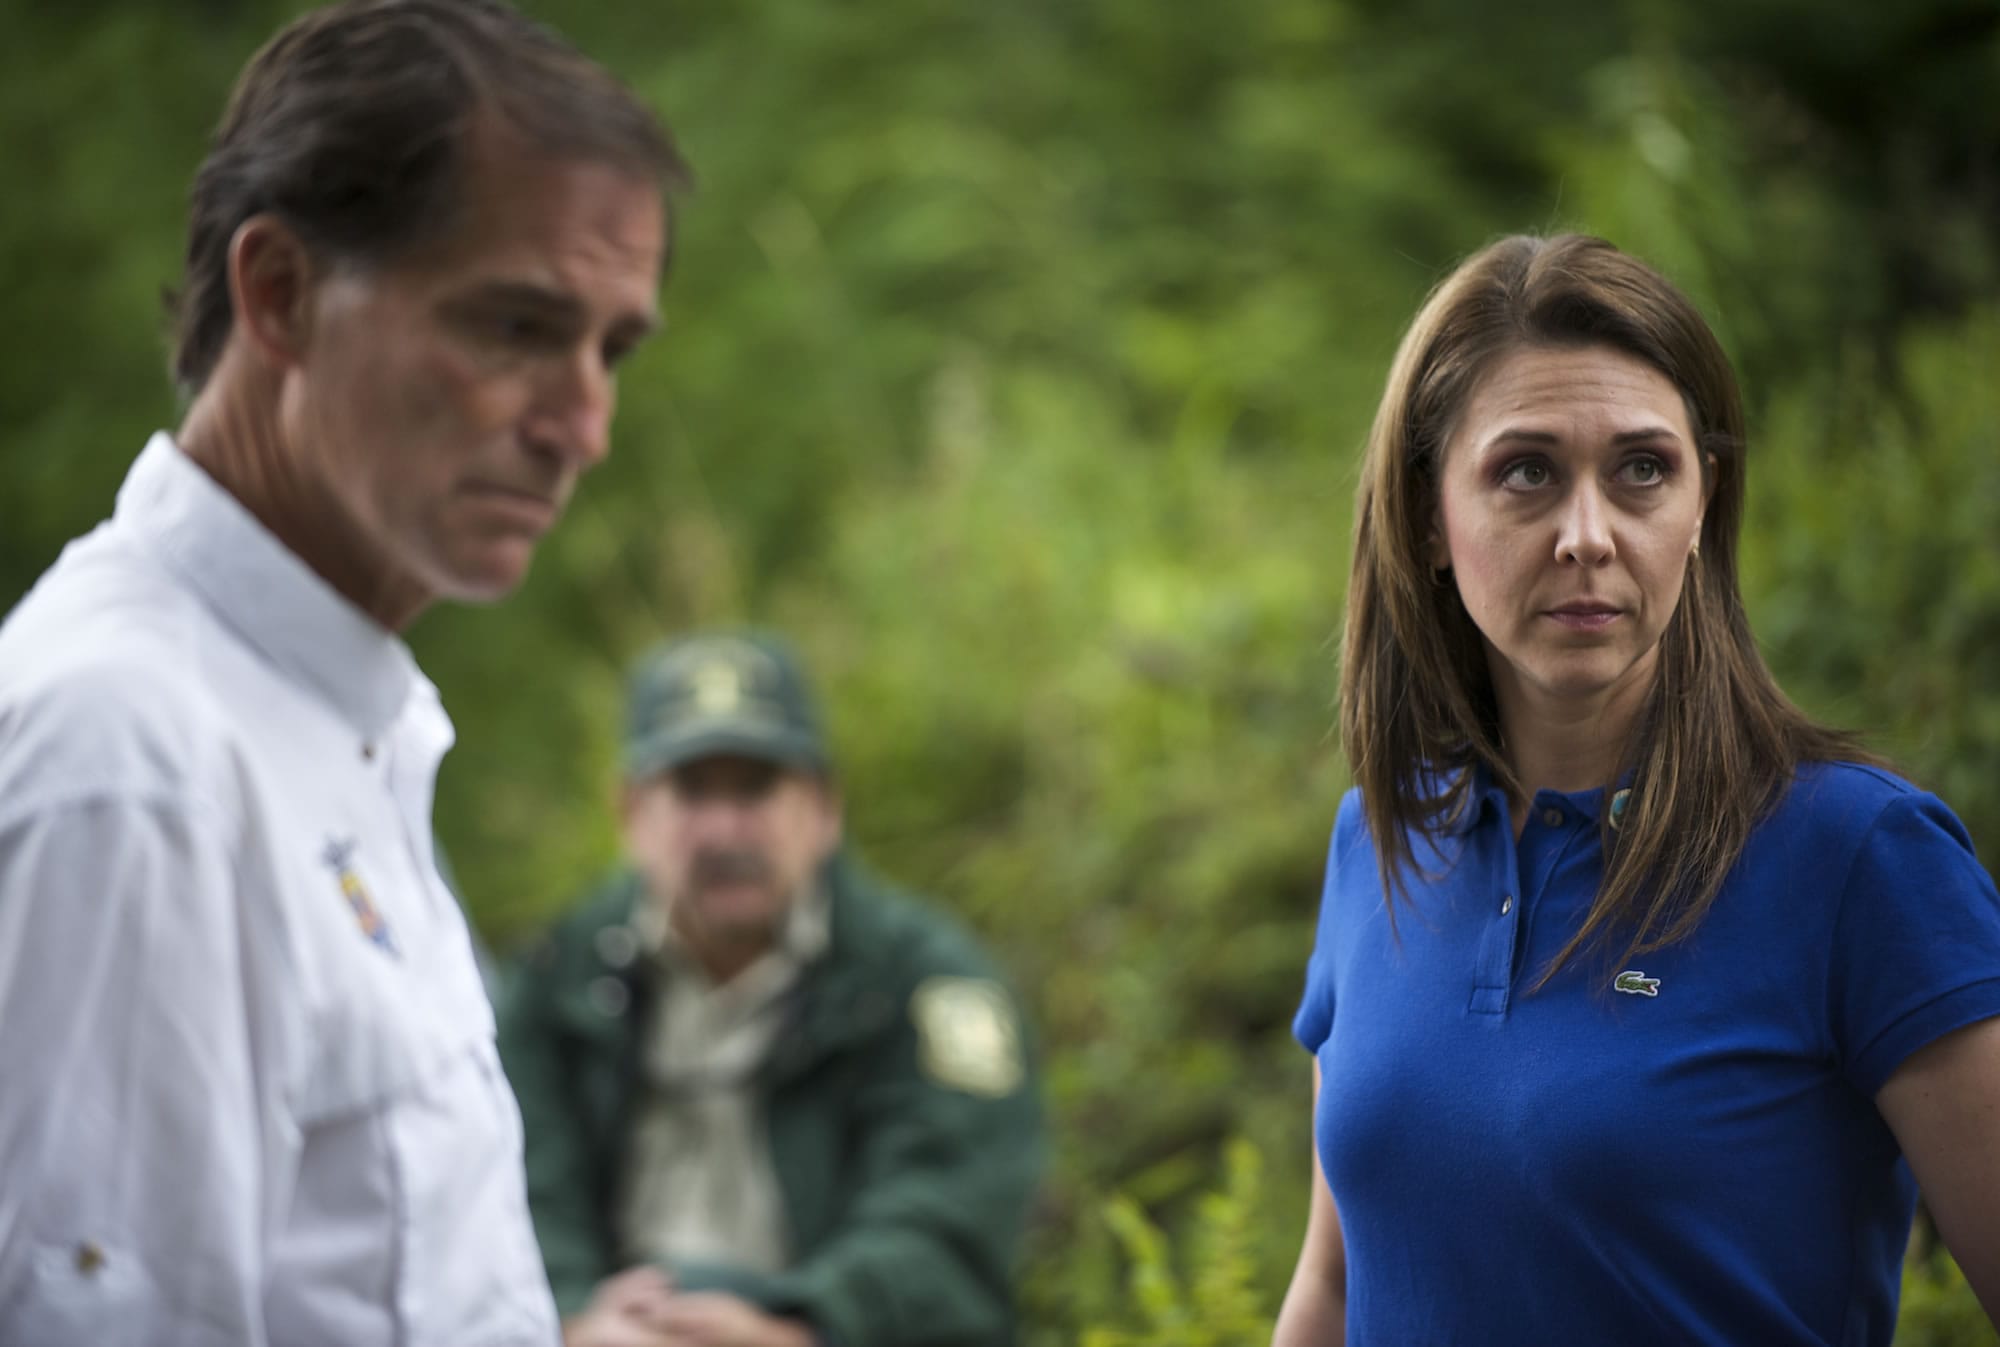 U.S. Rep. Jaime Herrera Beutler, R-Battle Ground, hosts Dan Ashe, then the director of the U.S. Fish and Wildlife Service, and others for an August 2014 tour of the Gifford Pinchot National Forest and discussion on forest management.